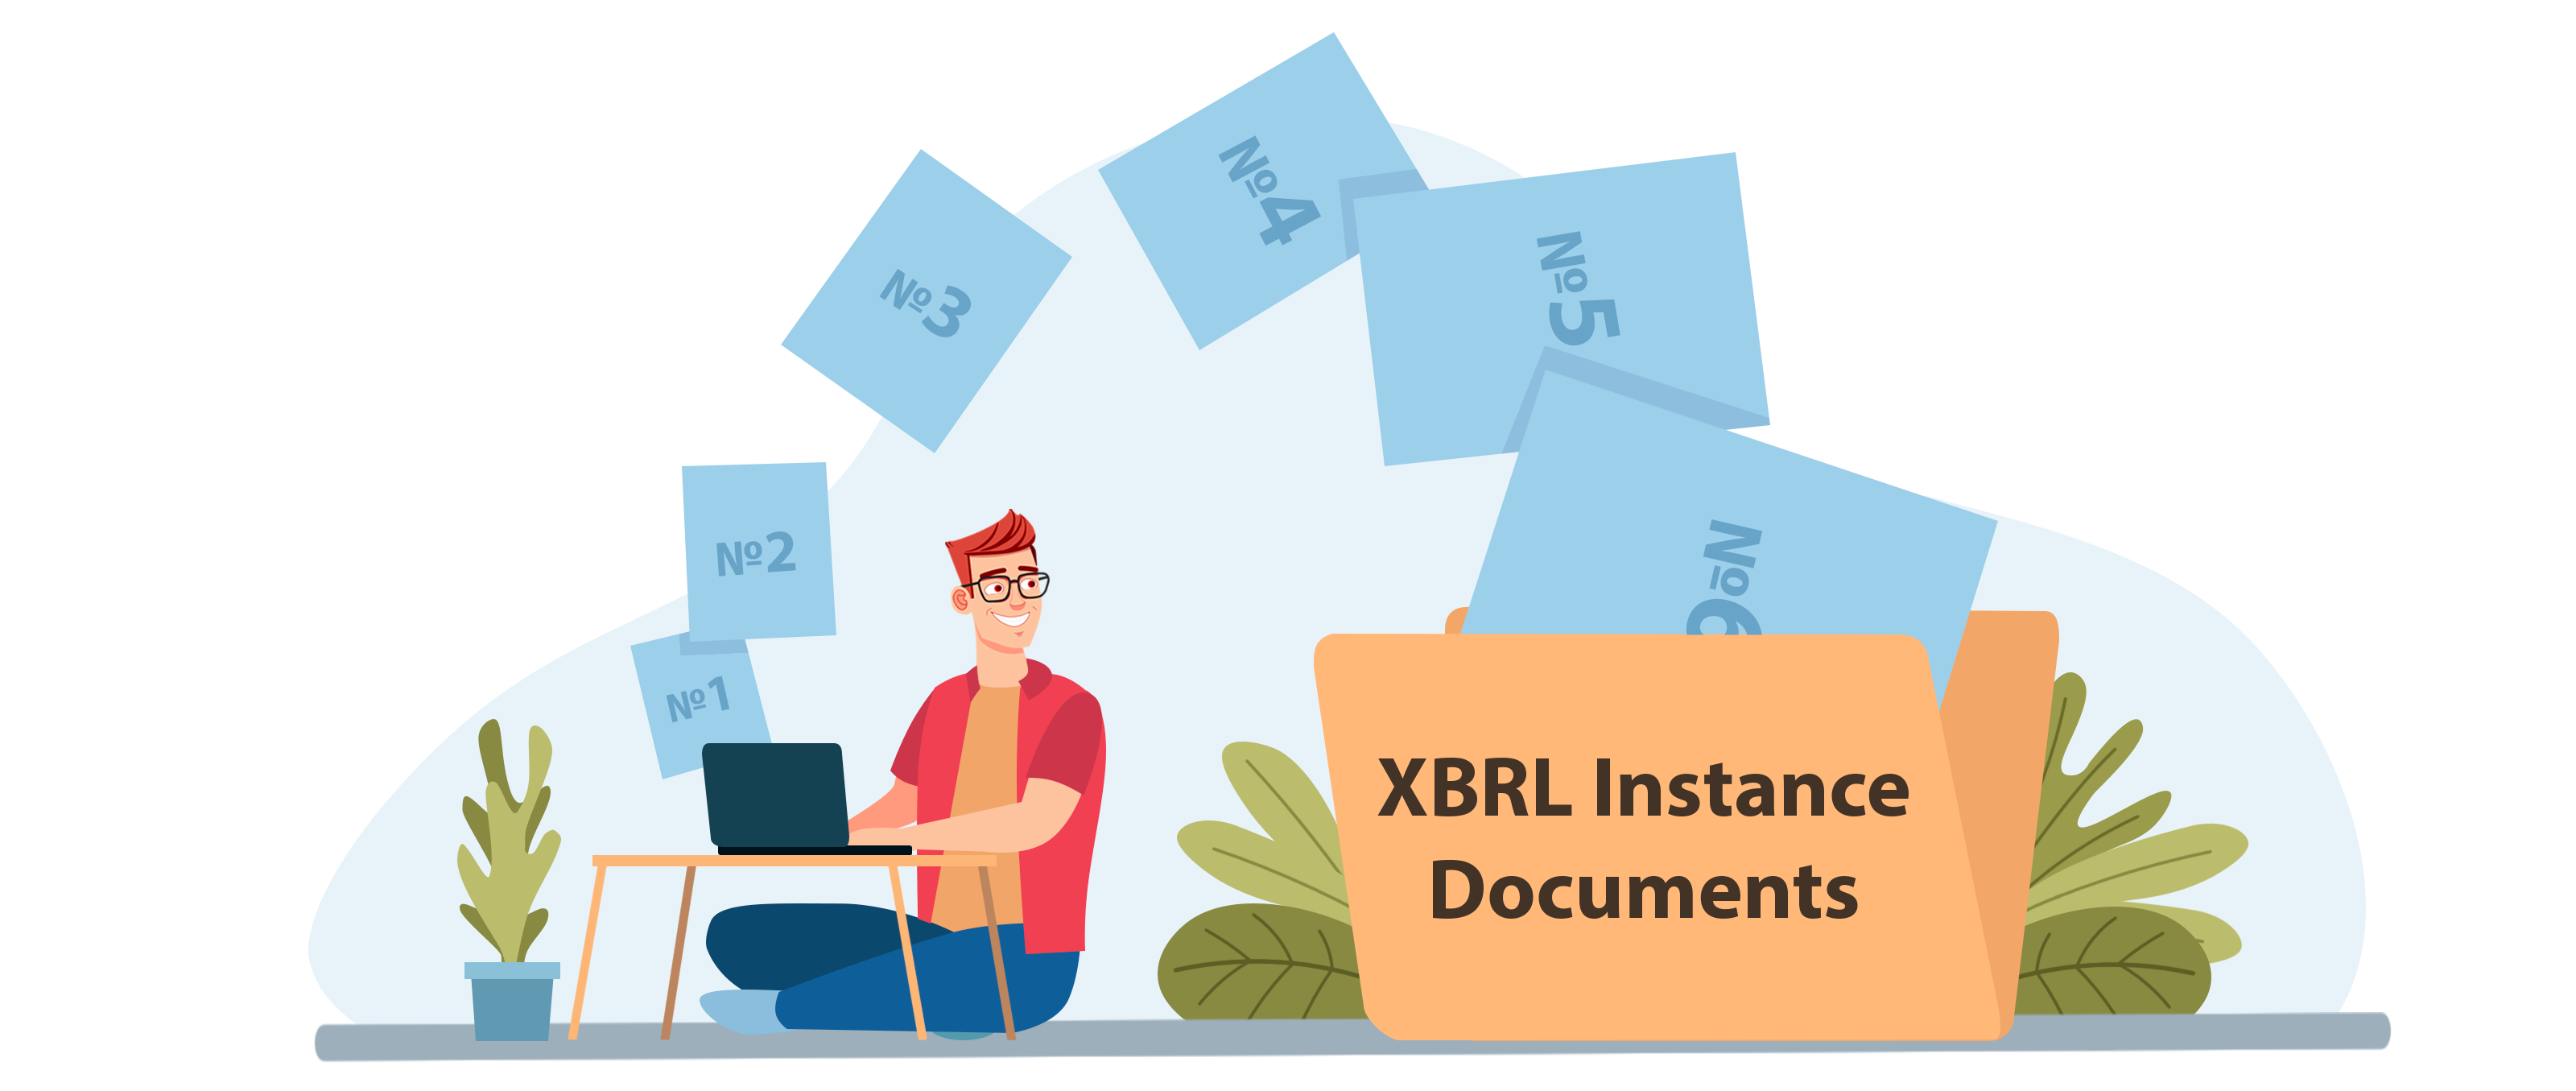 Xbrl instance documents